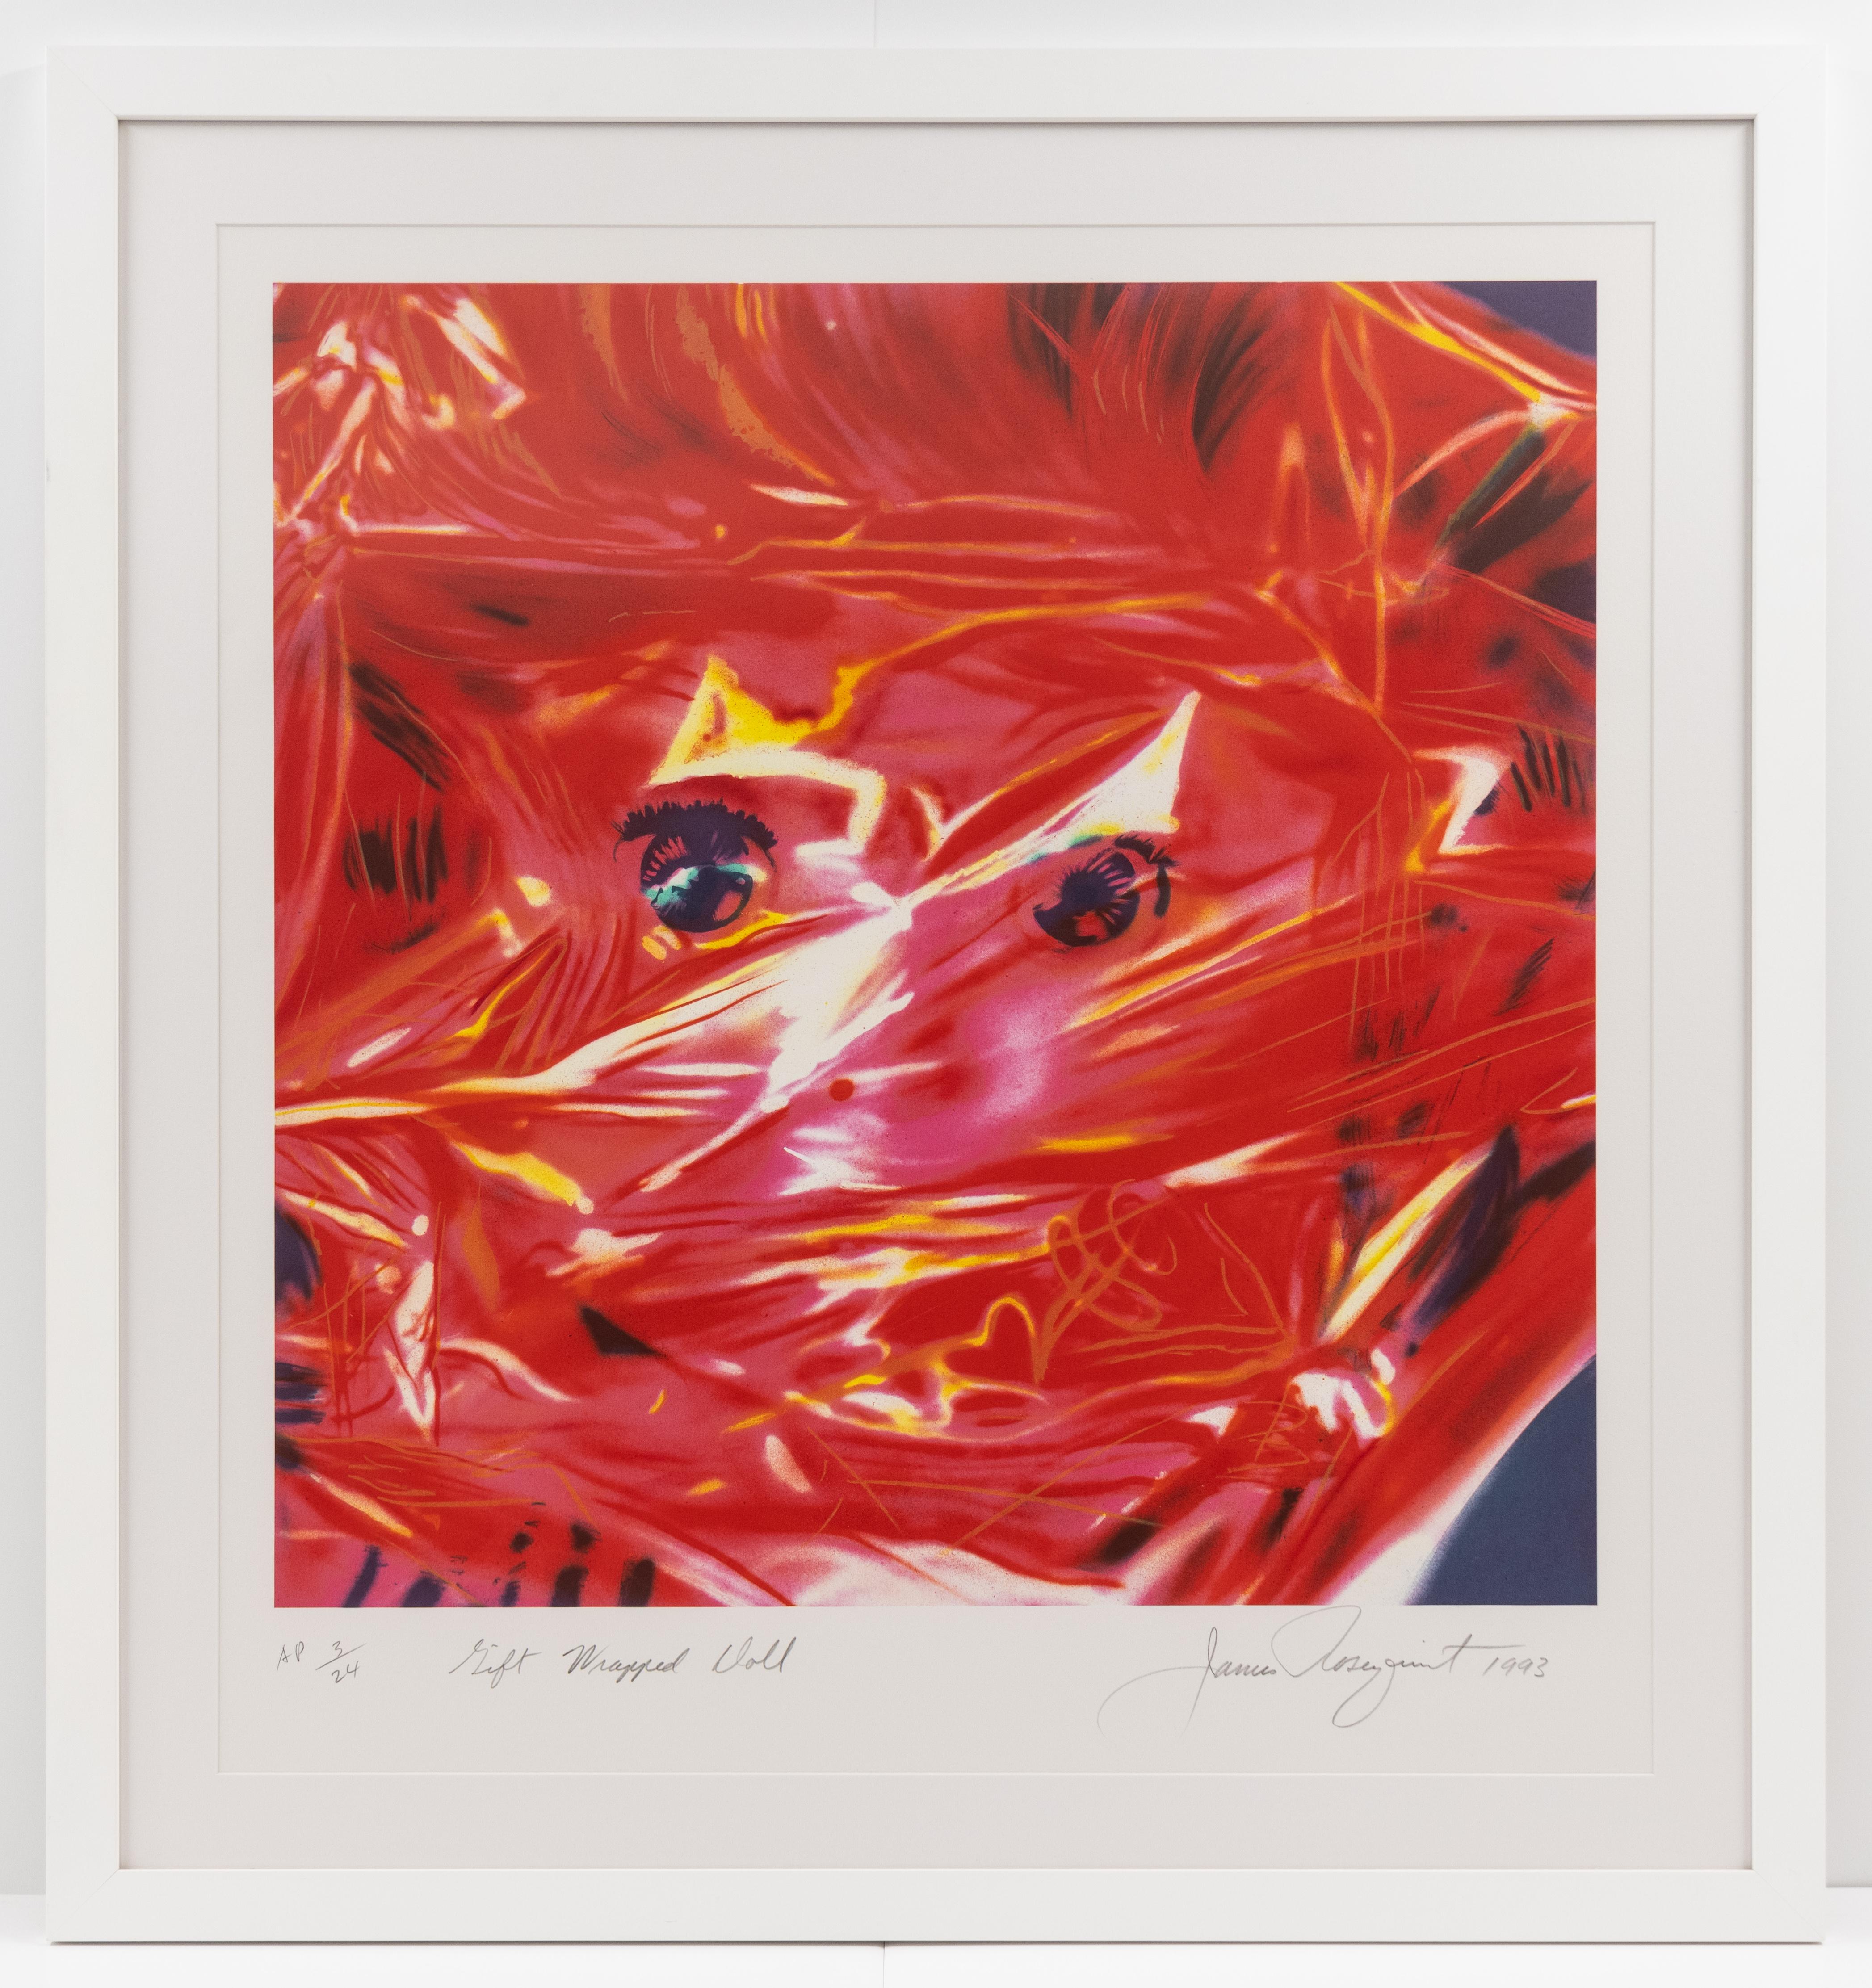 Gift Wrapped Doll - Contemporary Photograph by James Rosenquist